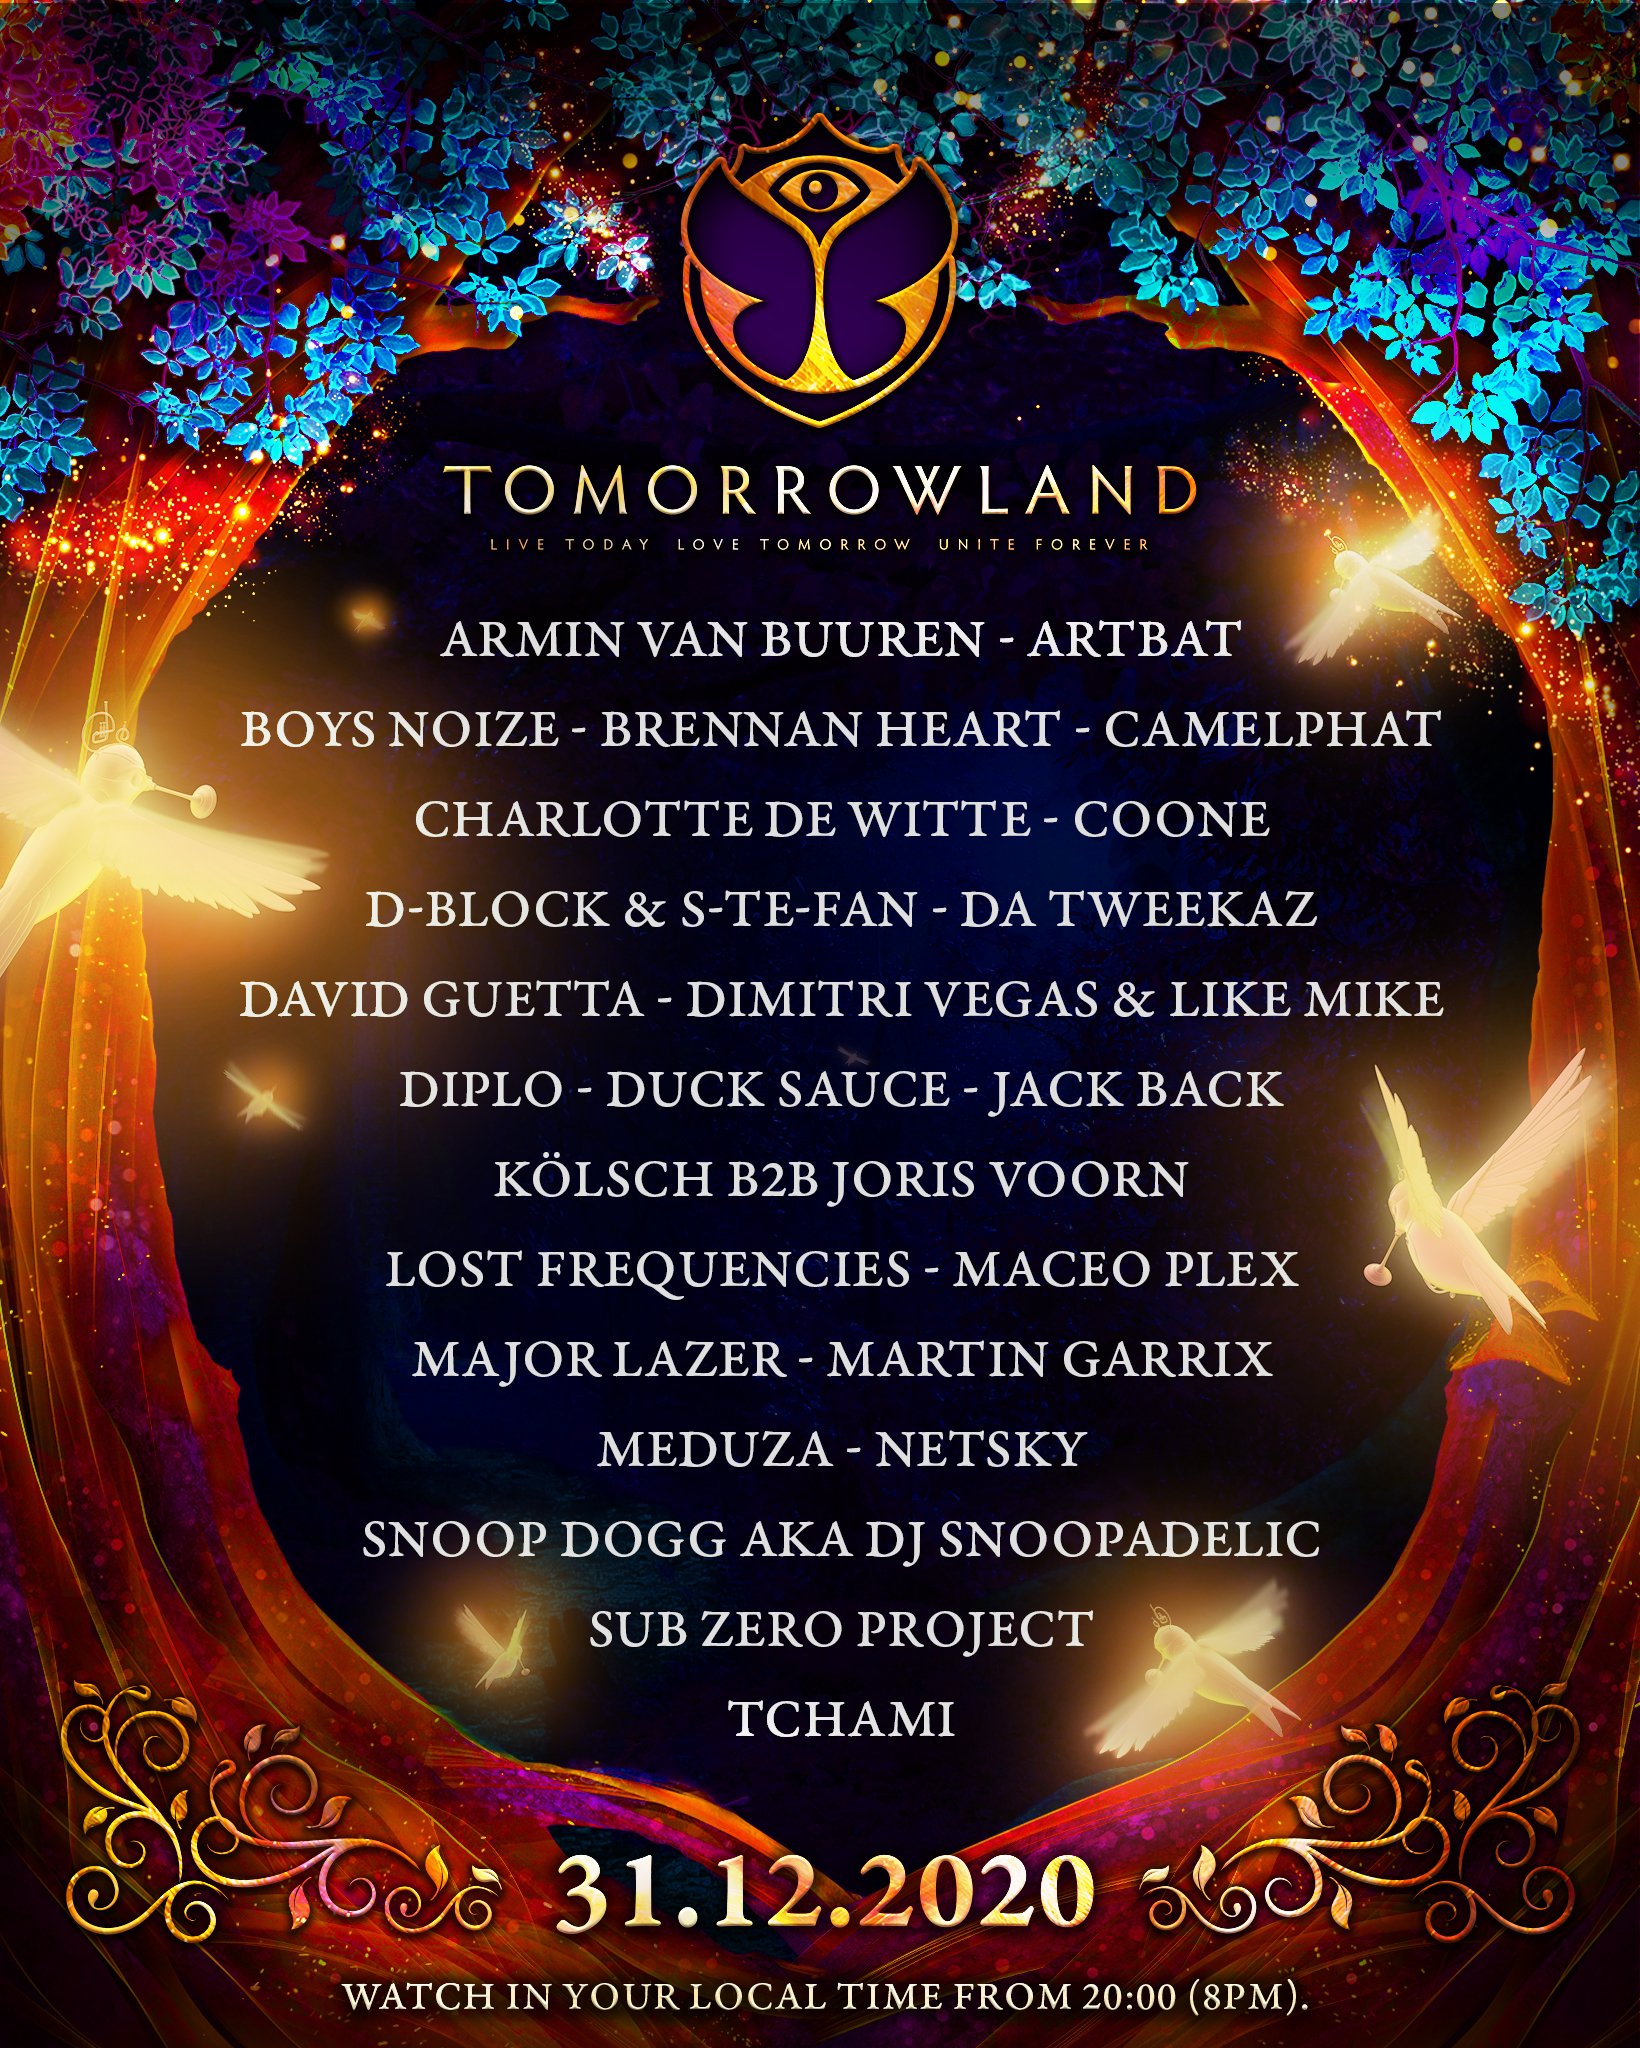 Tomorrowland on X: "TOMORROWLAND – 31.12.2020. A magical celebration at the end of an exceptional year. Enter a fascinating digital world, filled with music, magic and friendship. More than 25 of the